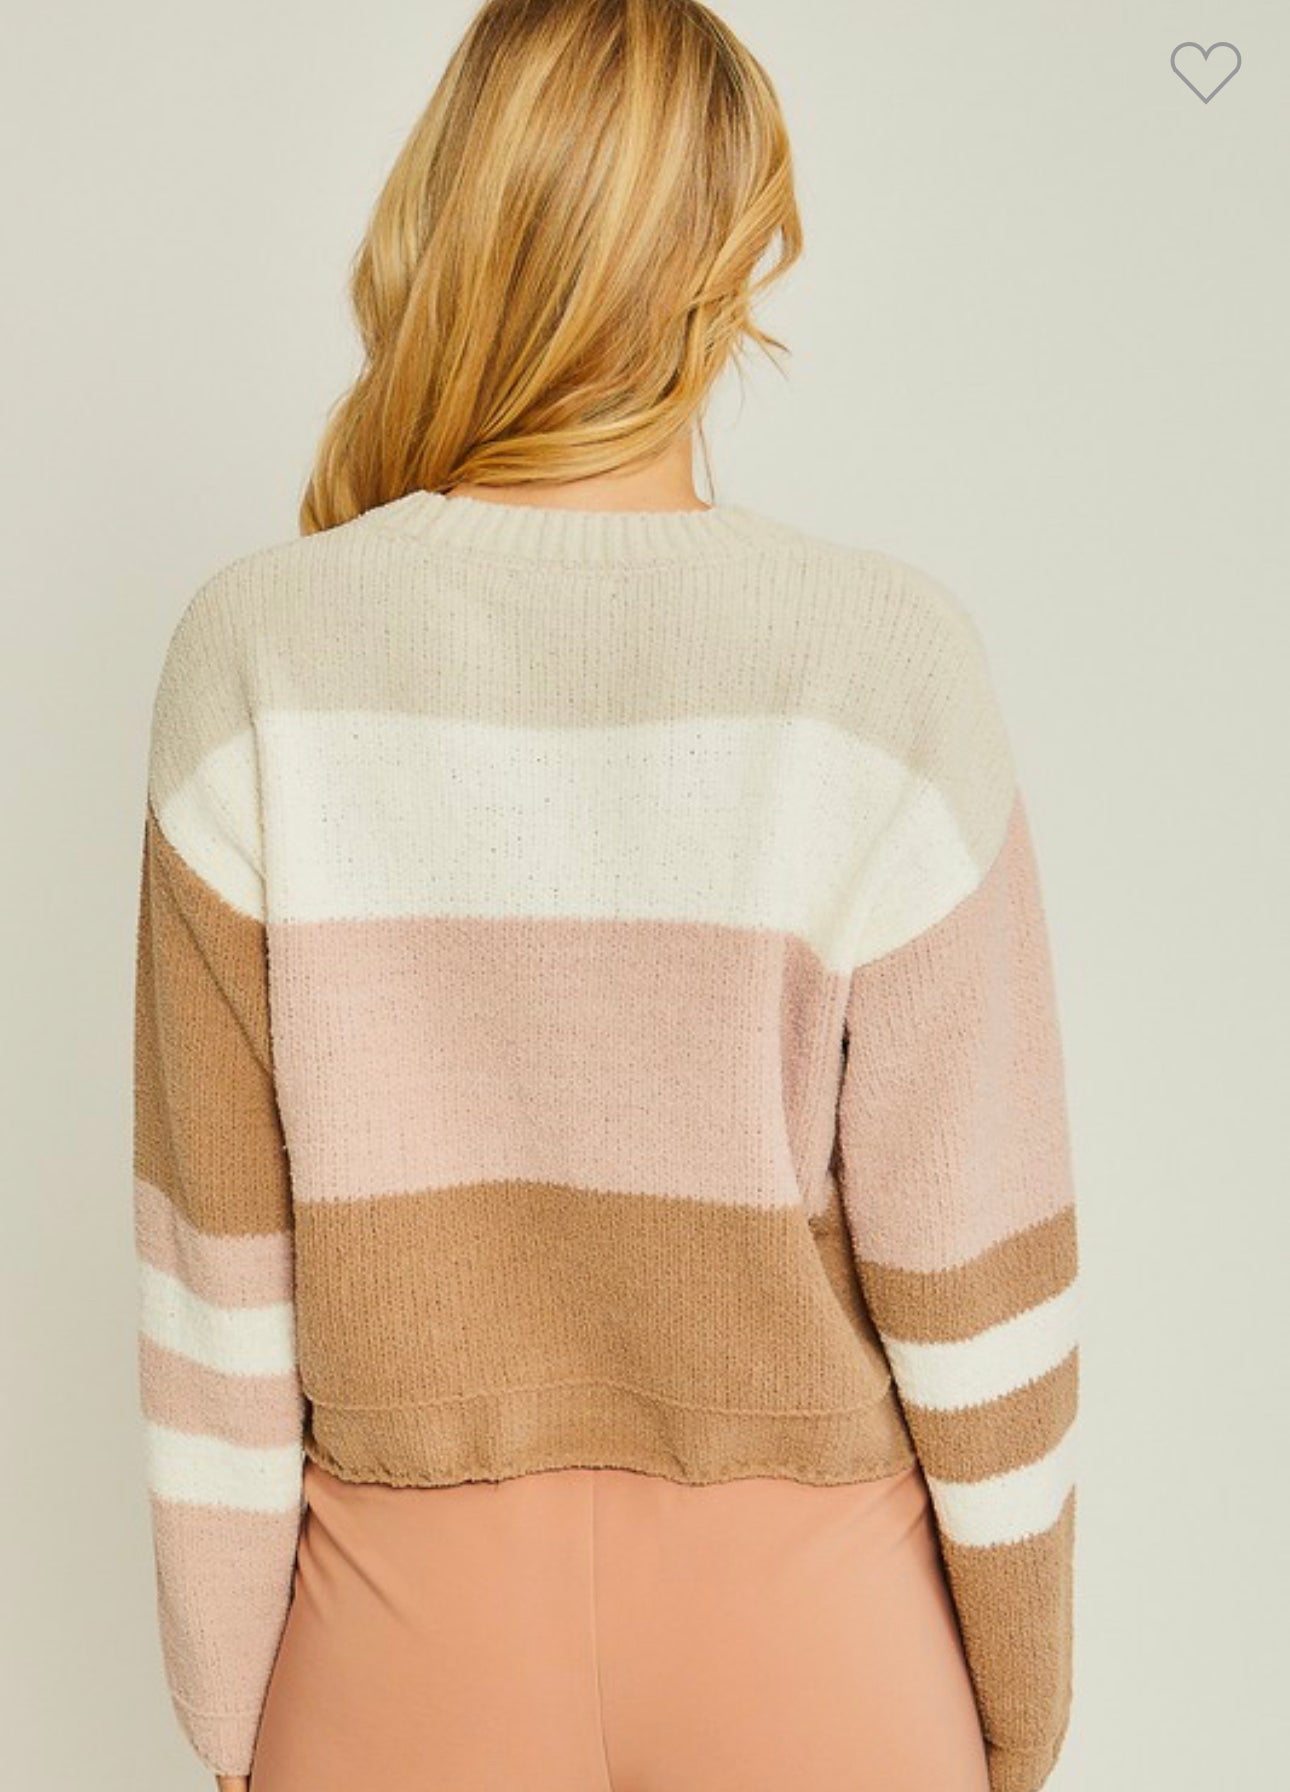 Emily - Taupe/Blush Color Block Cropped Sweater